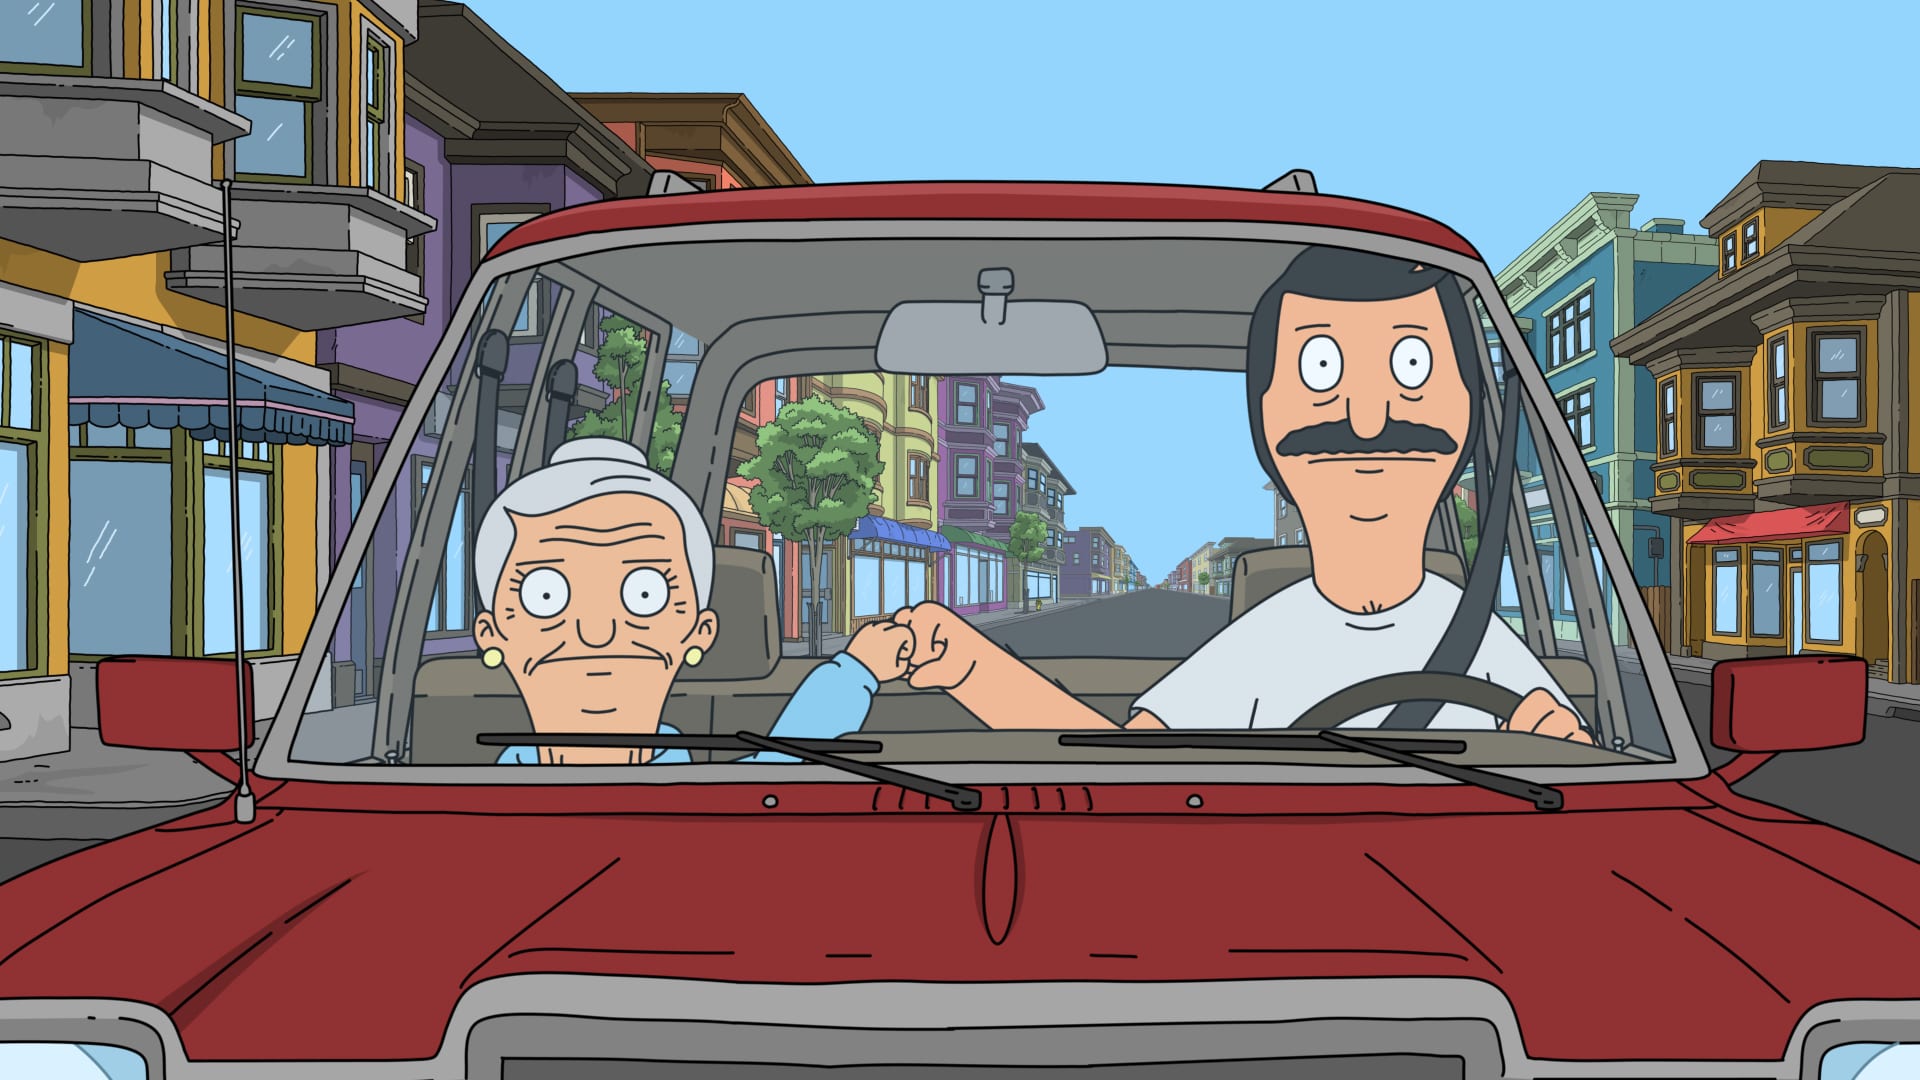 Geek insider, geekinsider, geekinsider. Com,, obnoxious seniors and oversharing parents drive the belchers crazy on a very relatable 'bob's burgers', entertainment